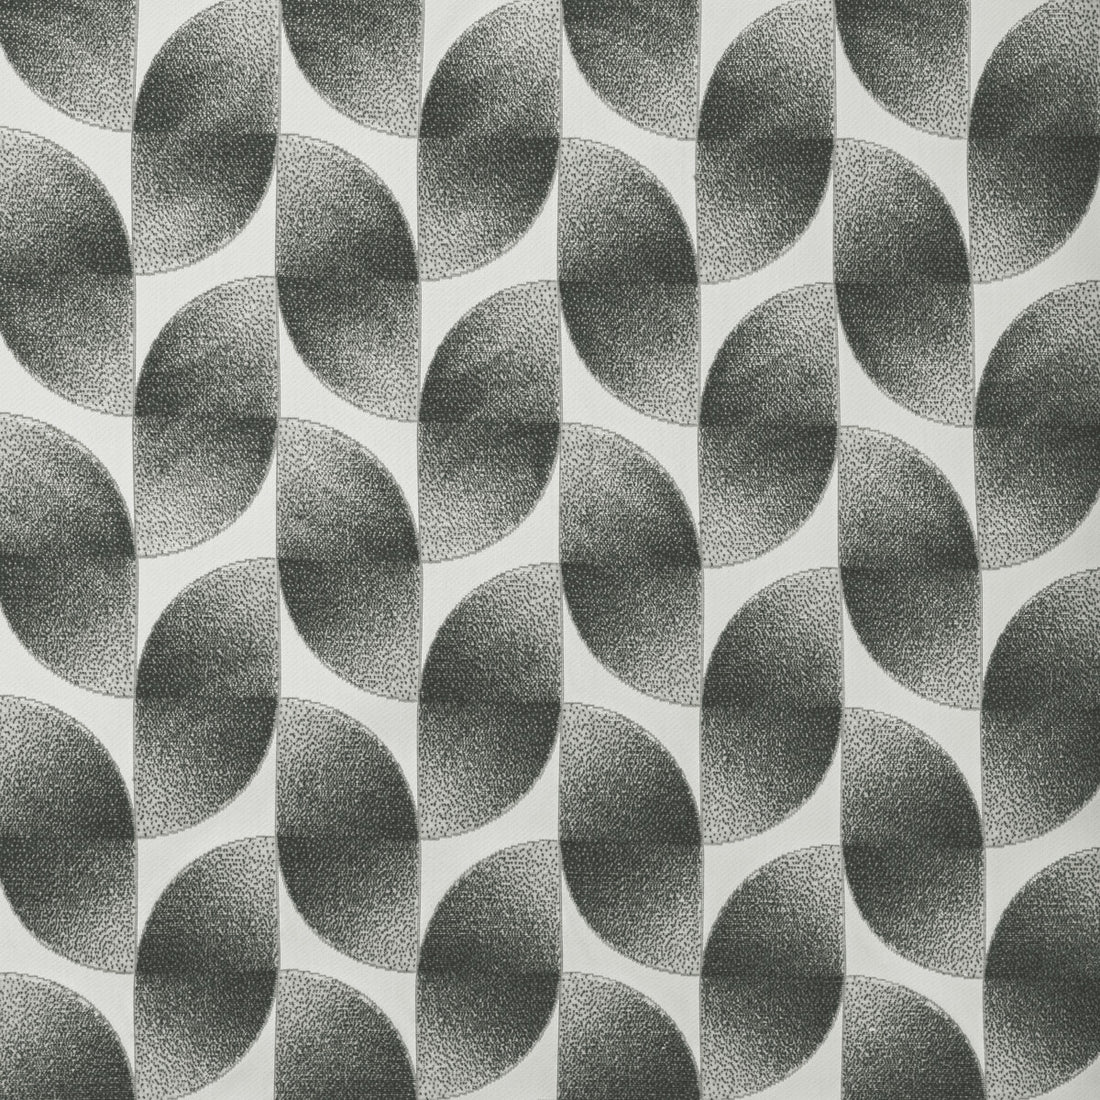 Moon Splice fabric in charcoal color - pattern 36576.21.0 - by Kravet Couture in the Modern Luxe Silk Luster collection